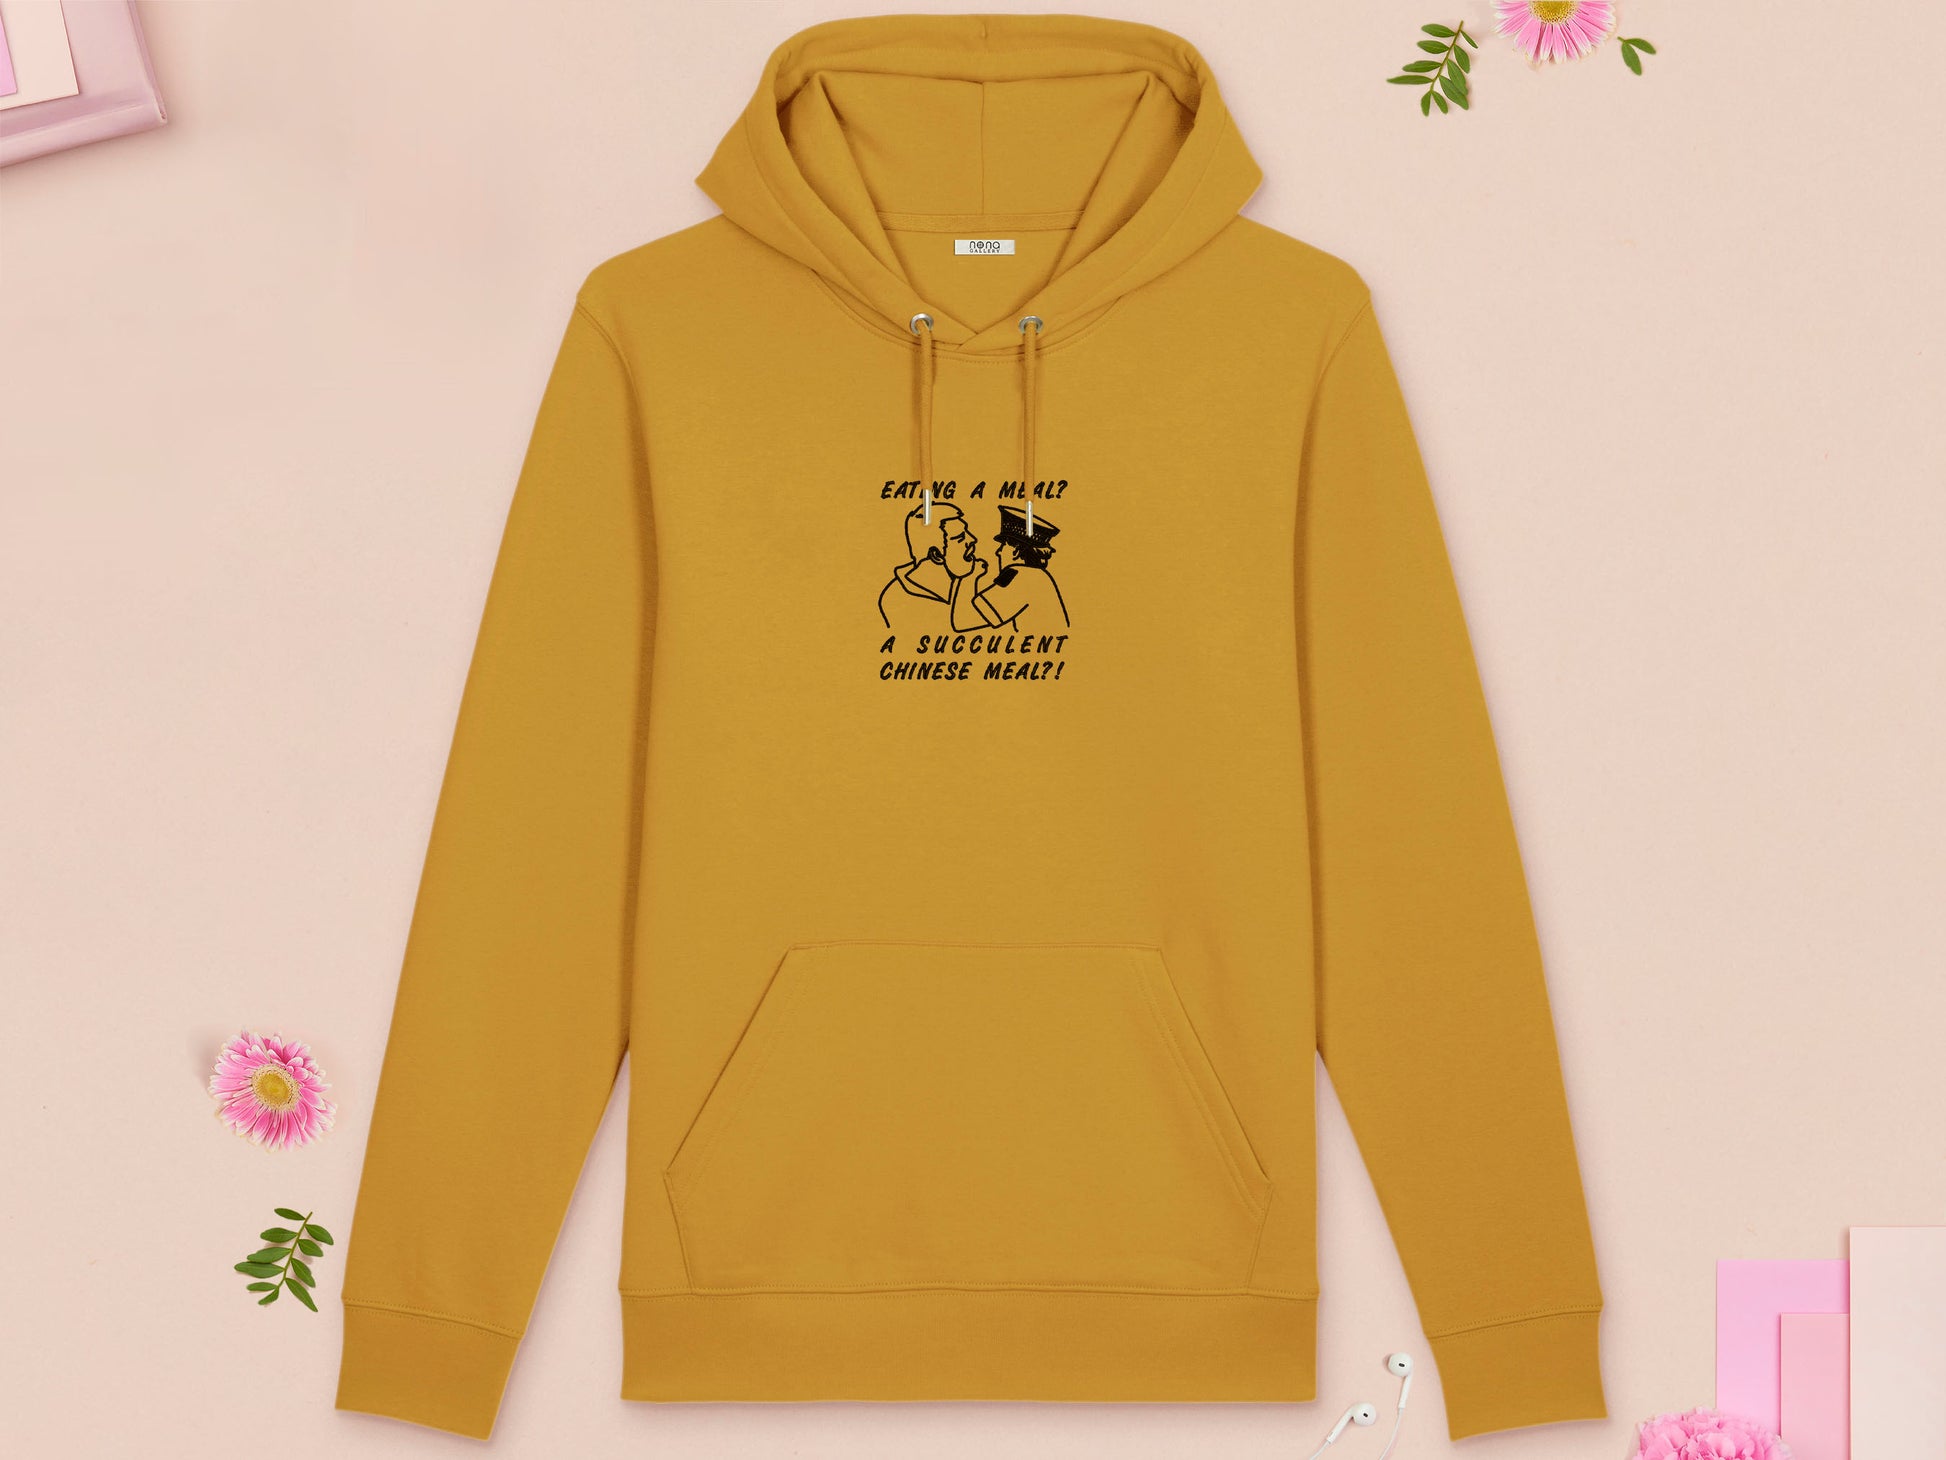 A yellow long sleeve fleece hoodie, with an embroidered black thread design of the viral democracy manifest video of Charles Dozsa being arrested by a policeman with the text reading Eating A Meal? A Succulent Chinese Meal?!